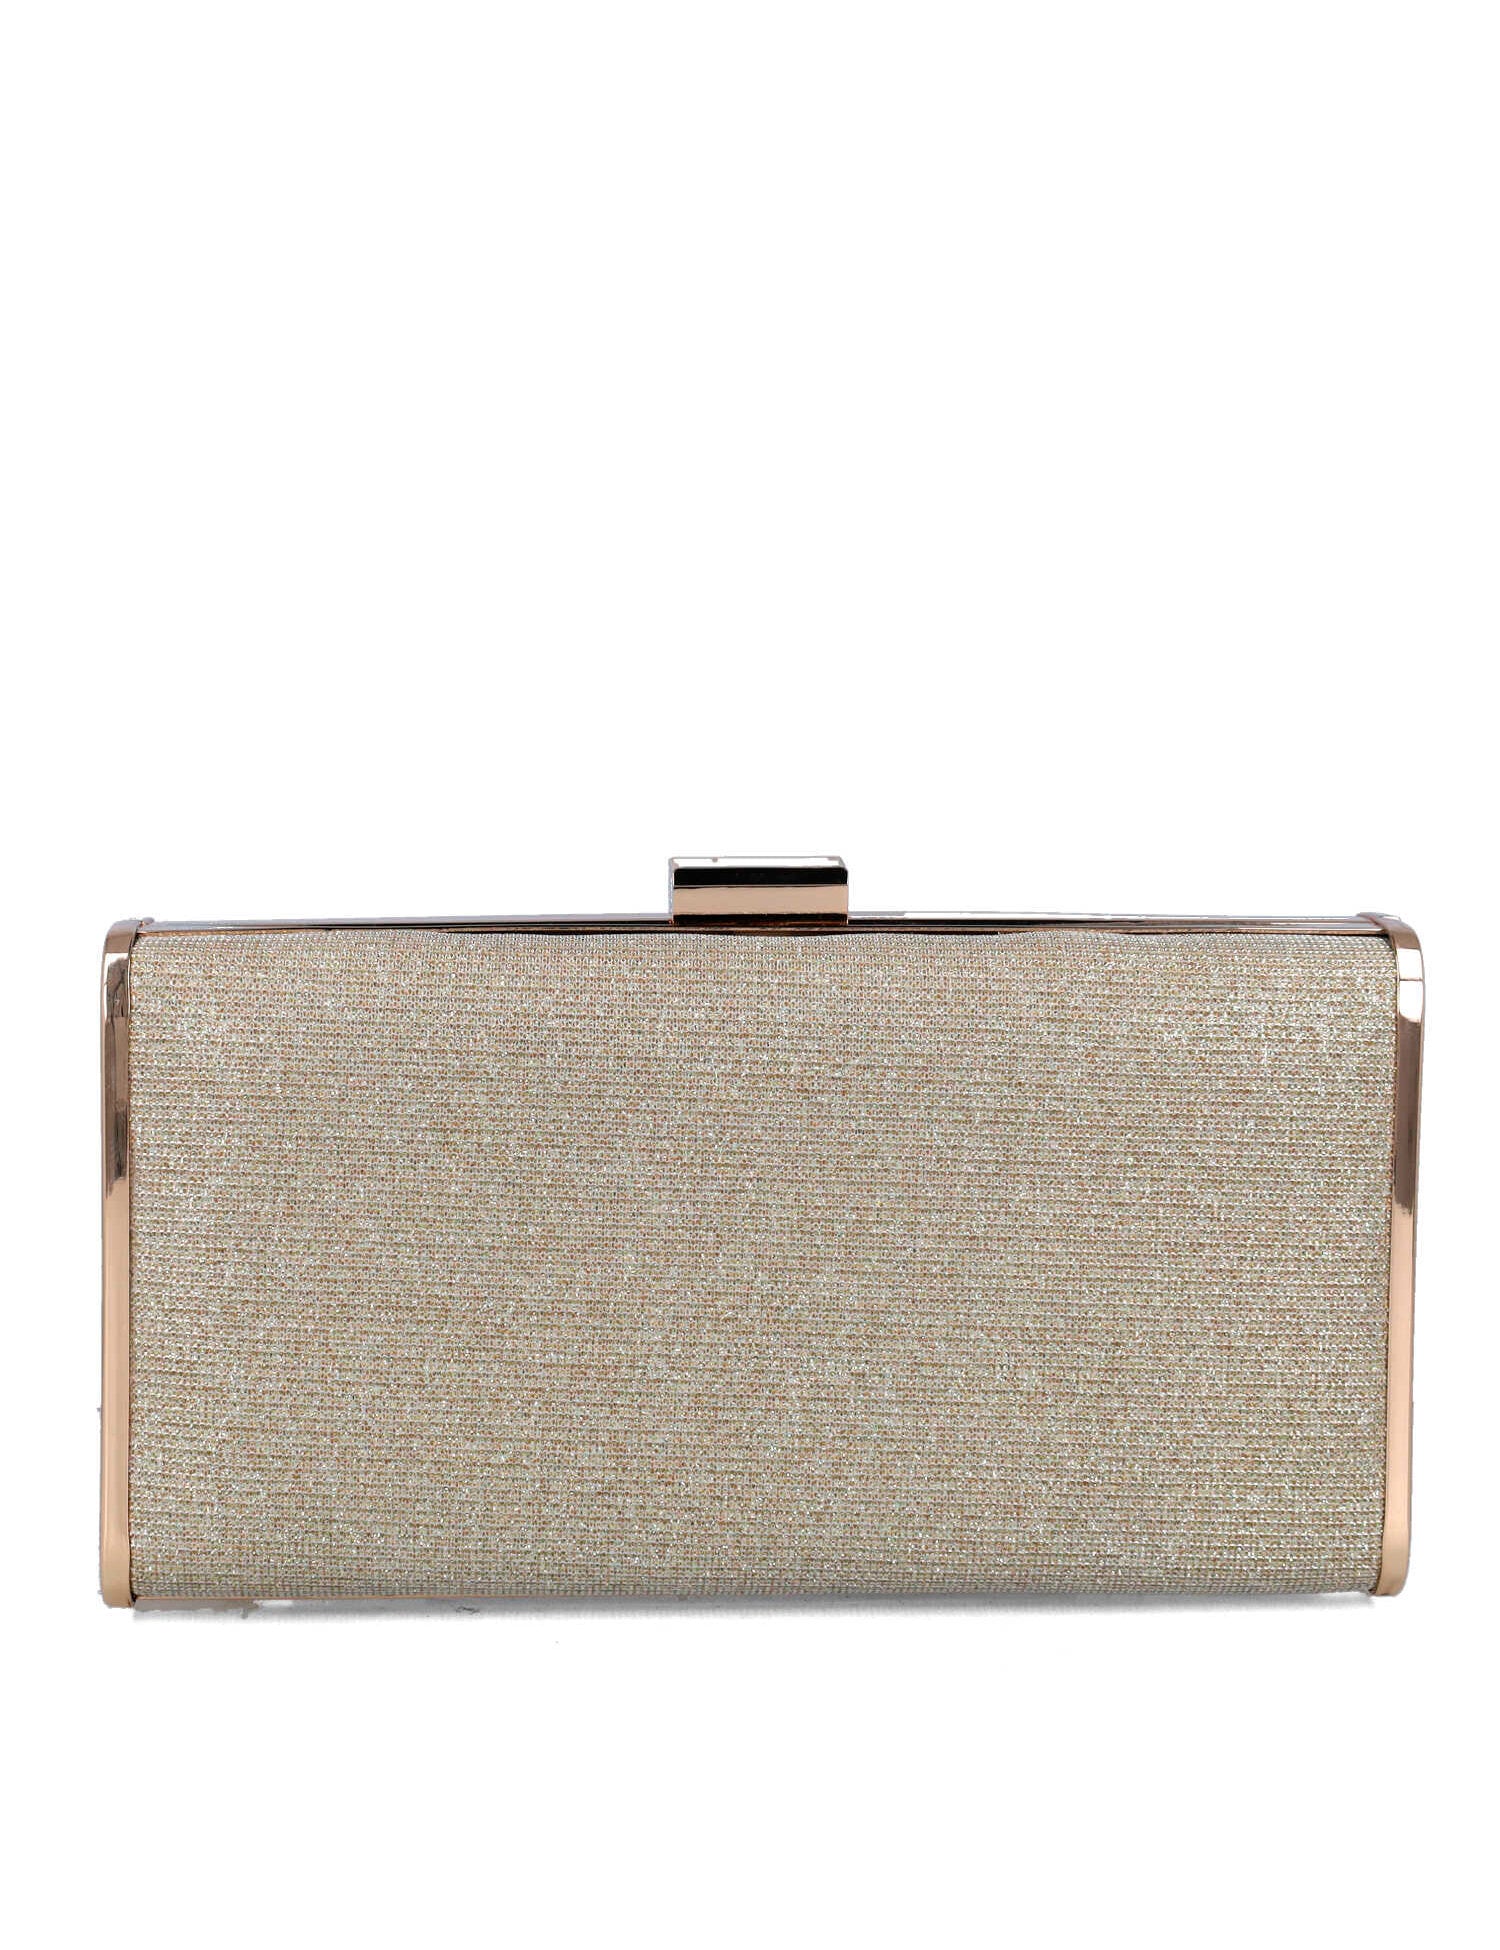 Beige Clutch With Gold Hardware_85656_00_03